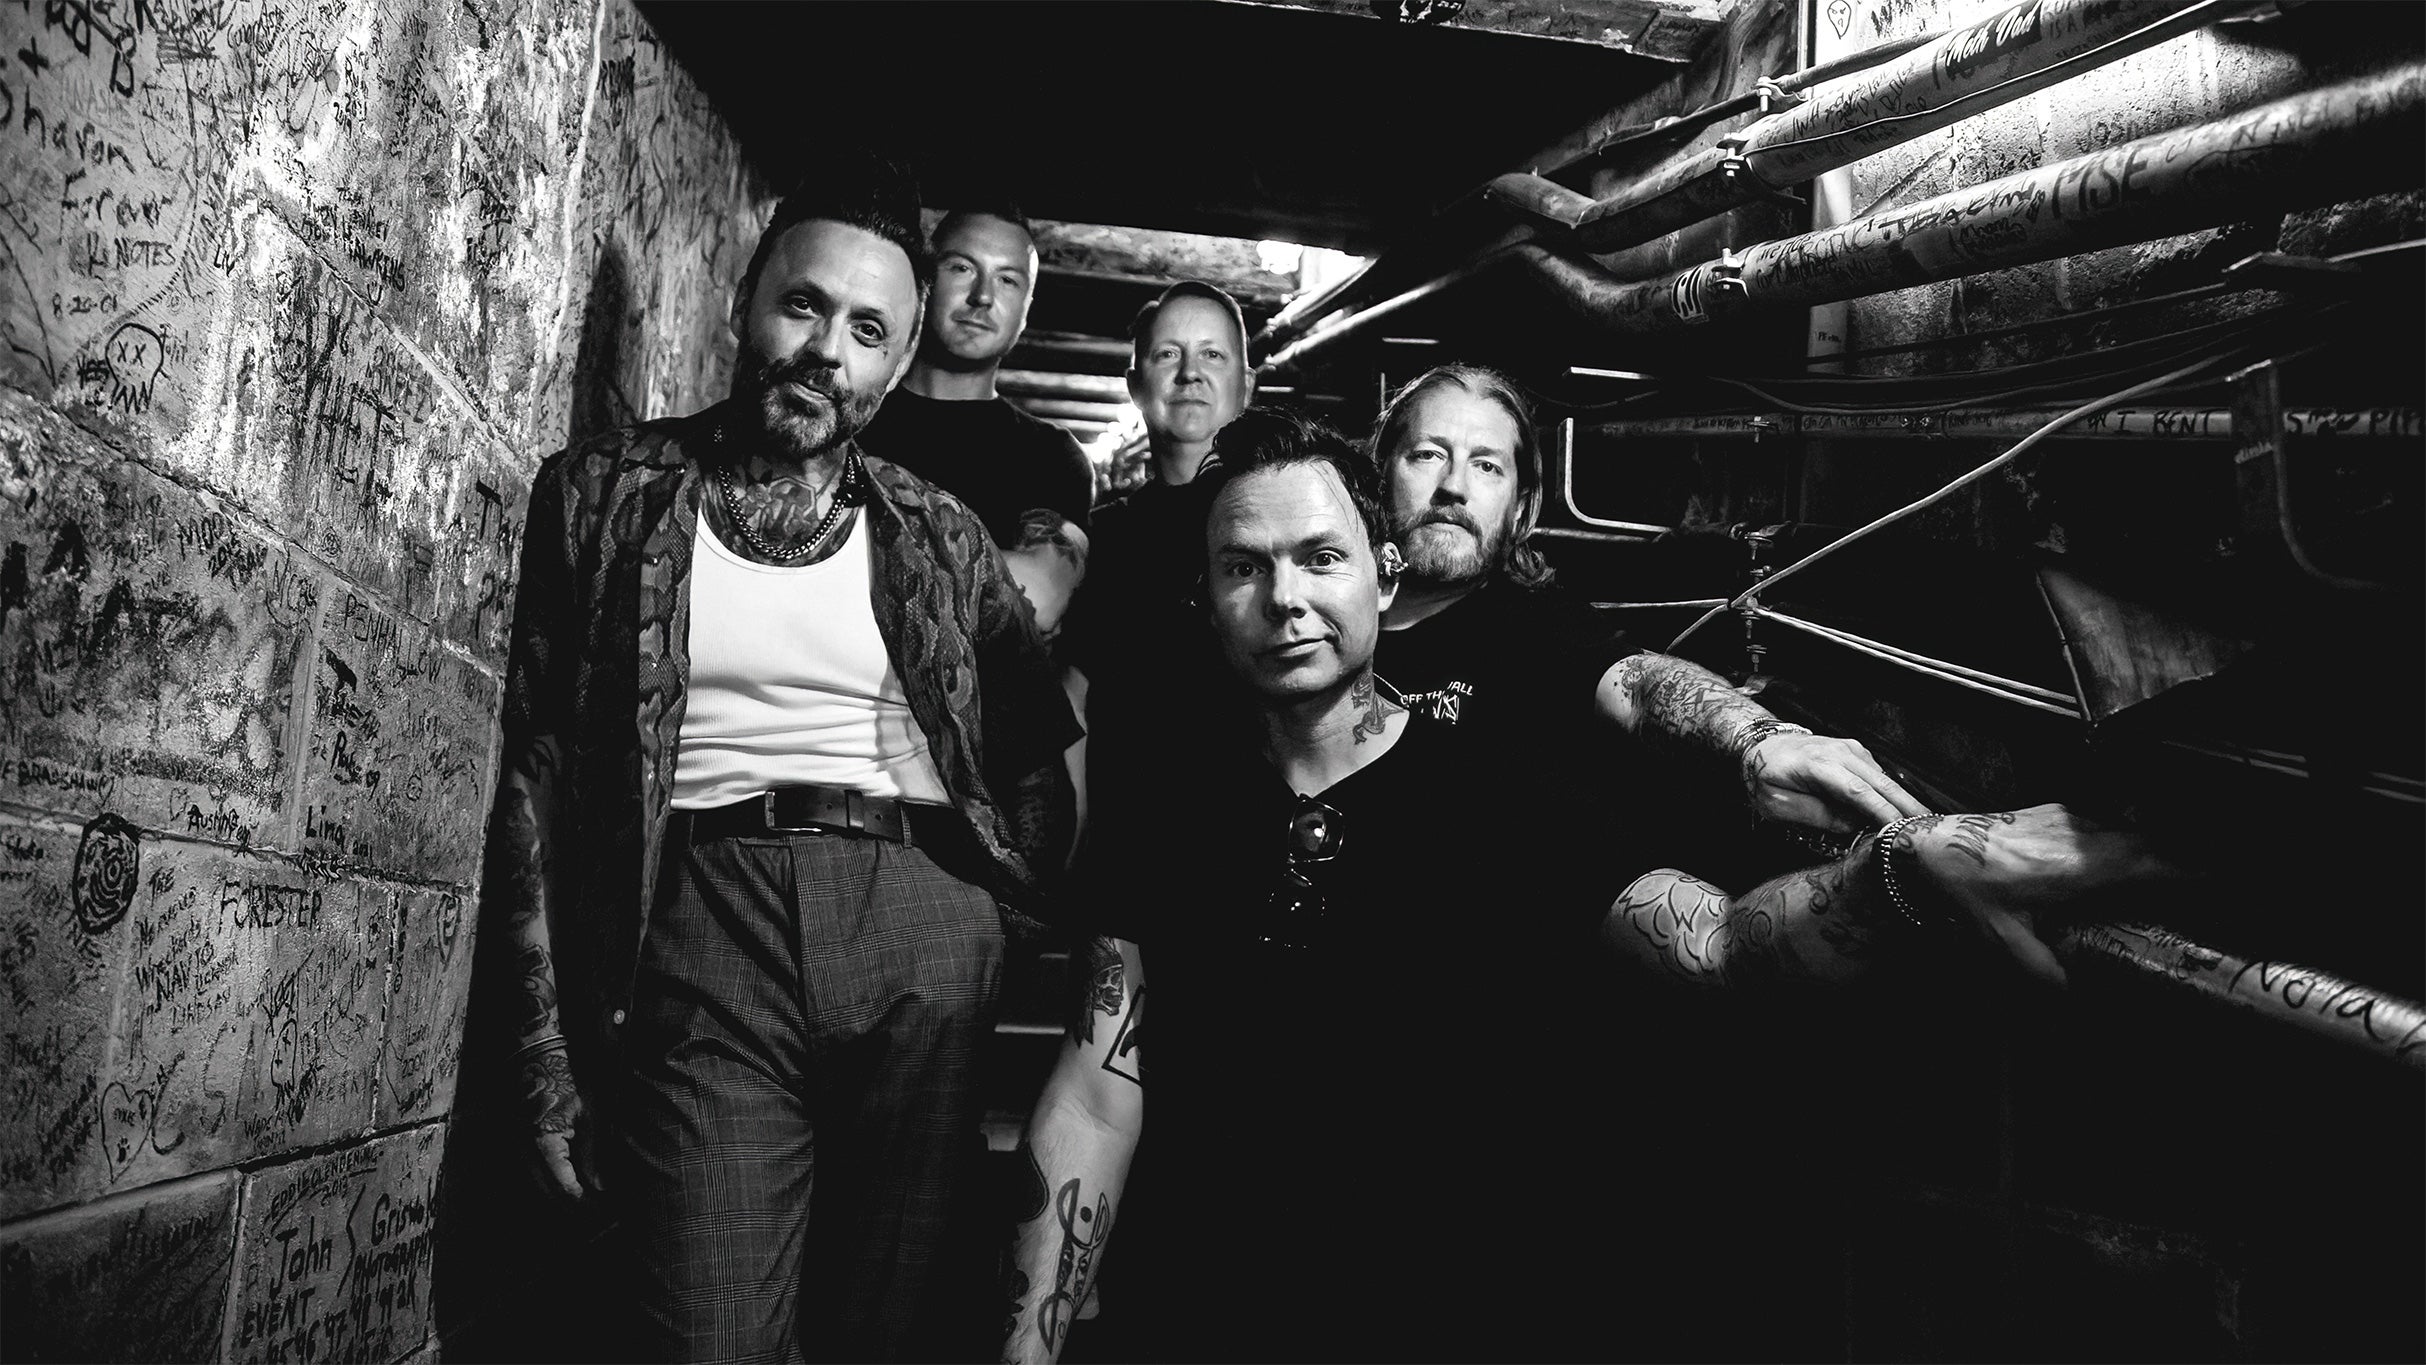 Blue October free presale listing for event tickets in Chattanooga, TN (The Walker Theatre)